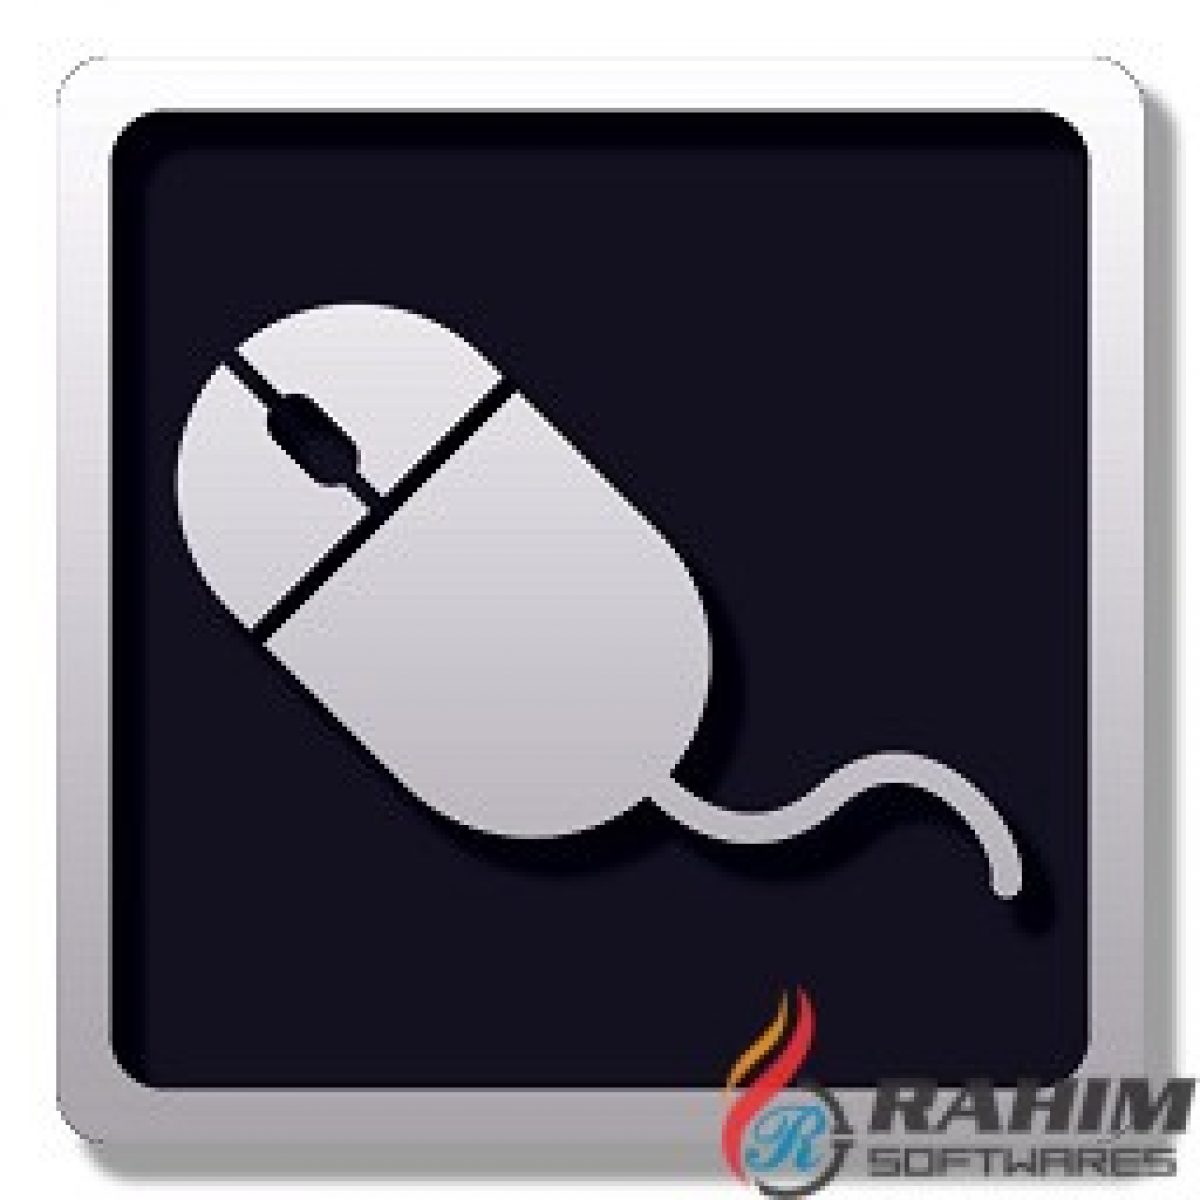 mouse and keyboard recorder 3.1.9.2 keygen